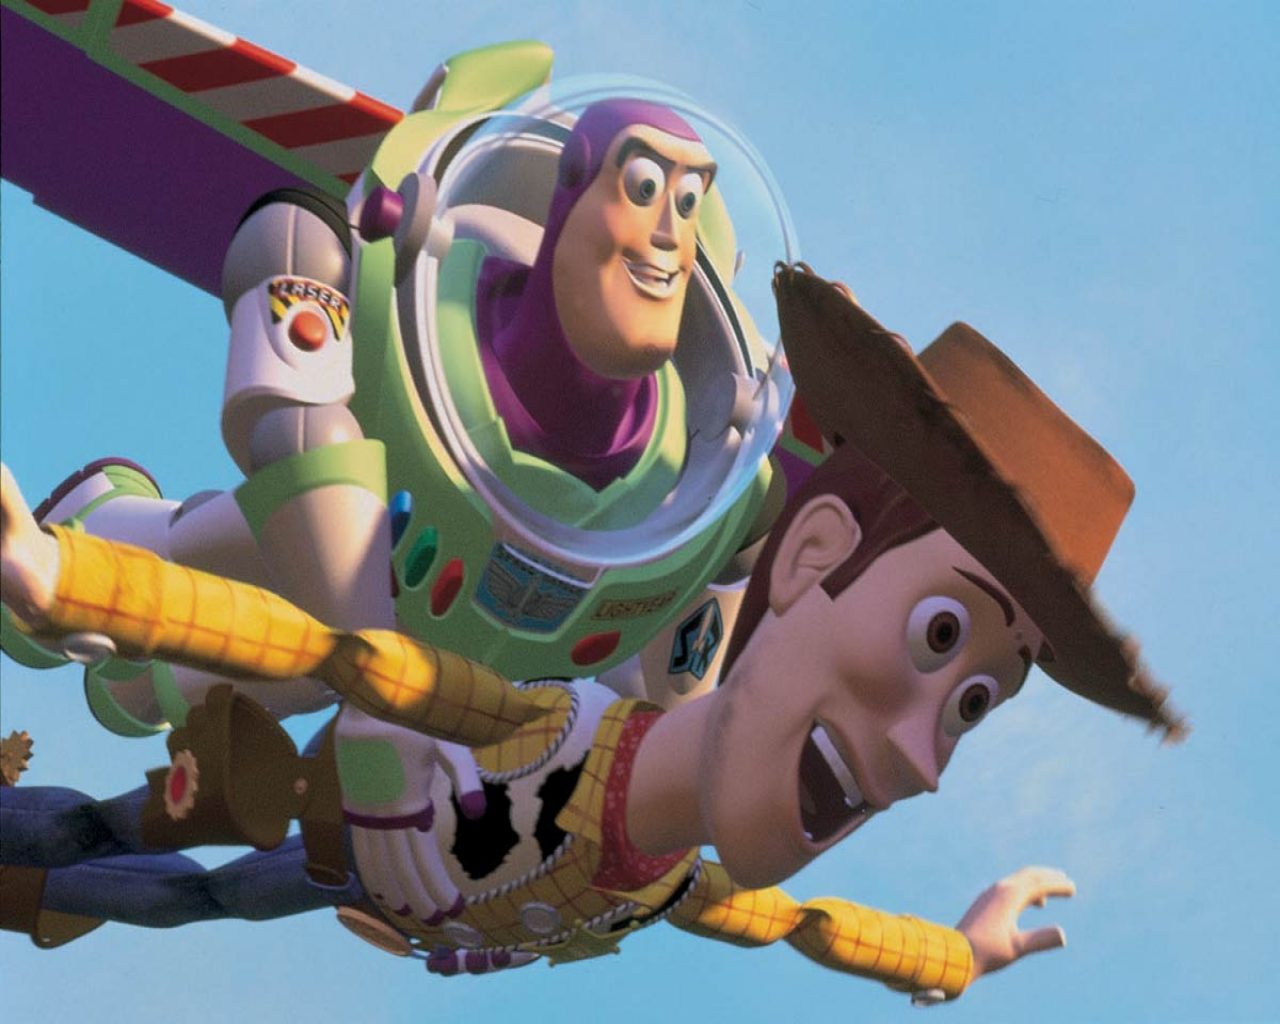 Free download Buzz Lightyear Sheriff Woody Jessie Toy Story Wallpaper Nude and Porn [1280x1024] for your Desktop, Mobile & Tablet. Explore Jessie Toy Story Wallpaper. Jessie Toy Story Wallpaper